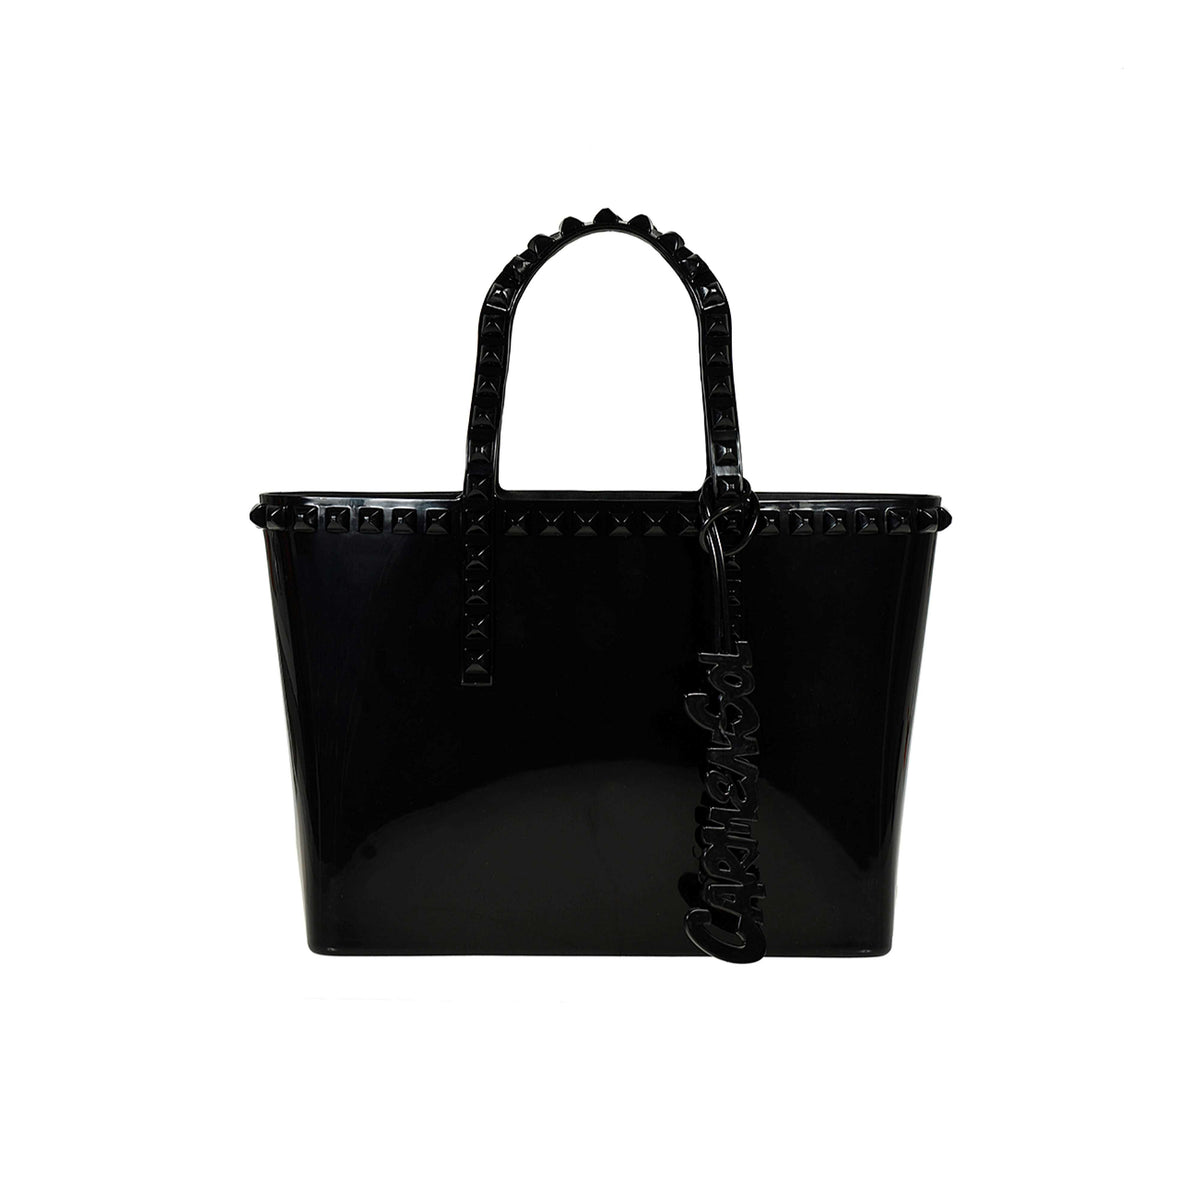 Black rubber bag from Carmen Sol with unique studded design